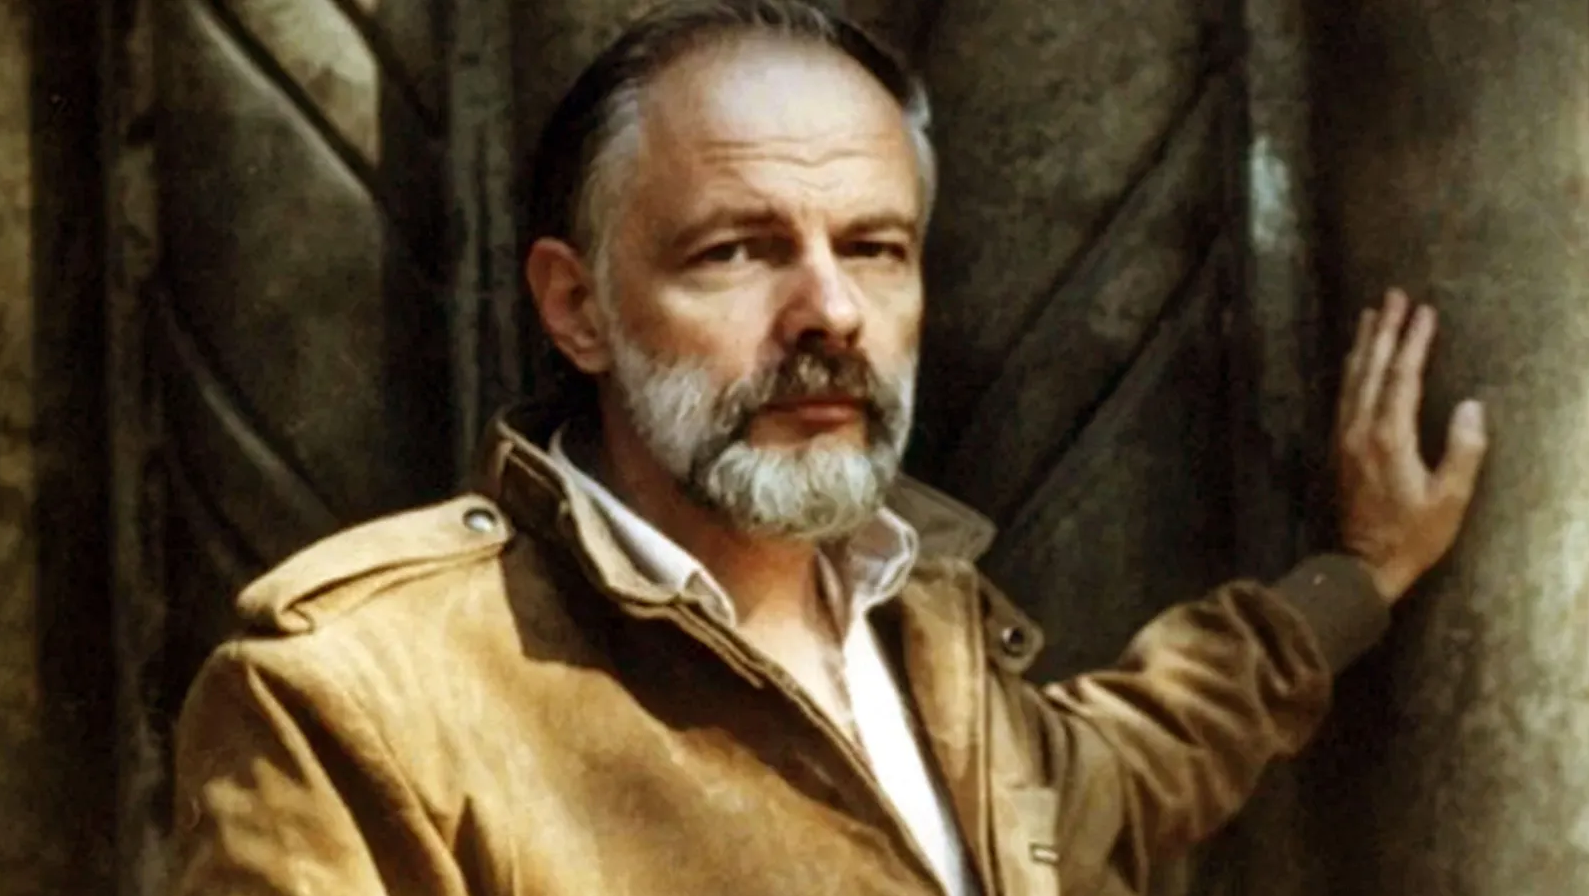 Philip K Dick: the writer who witnessed the future